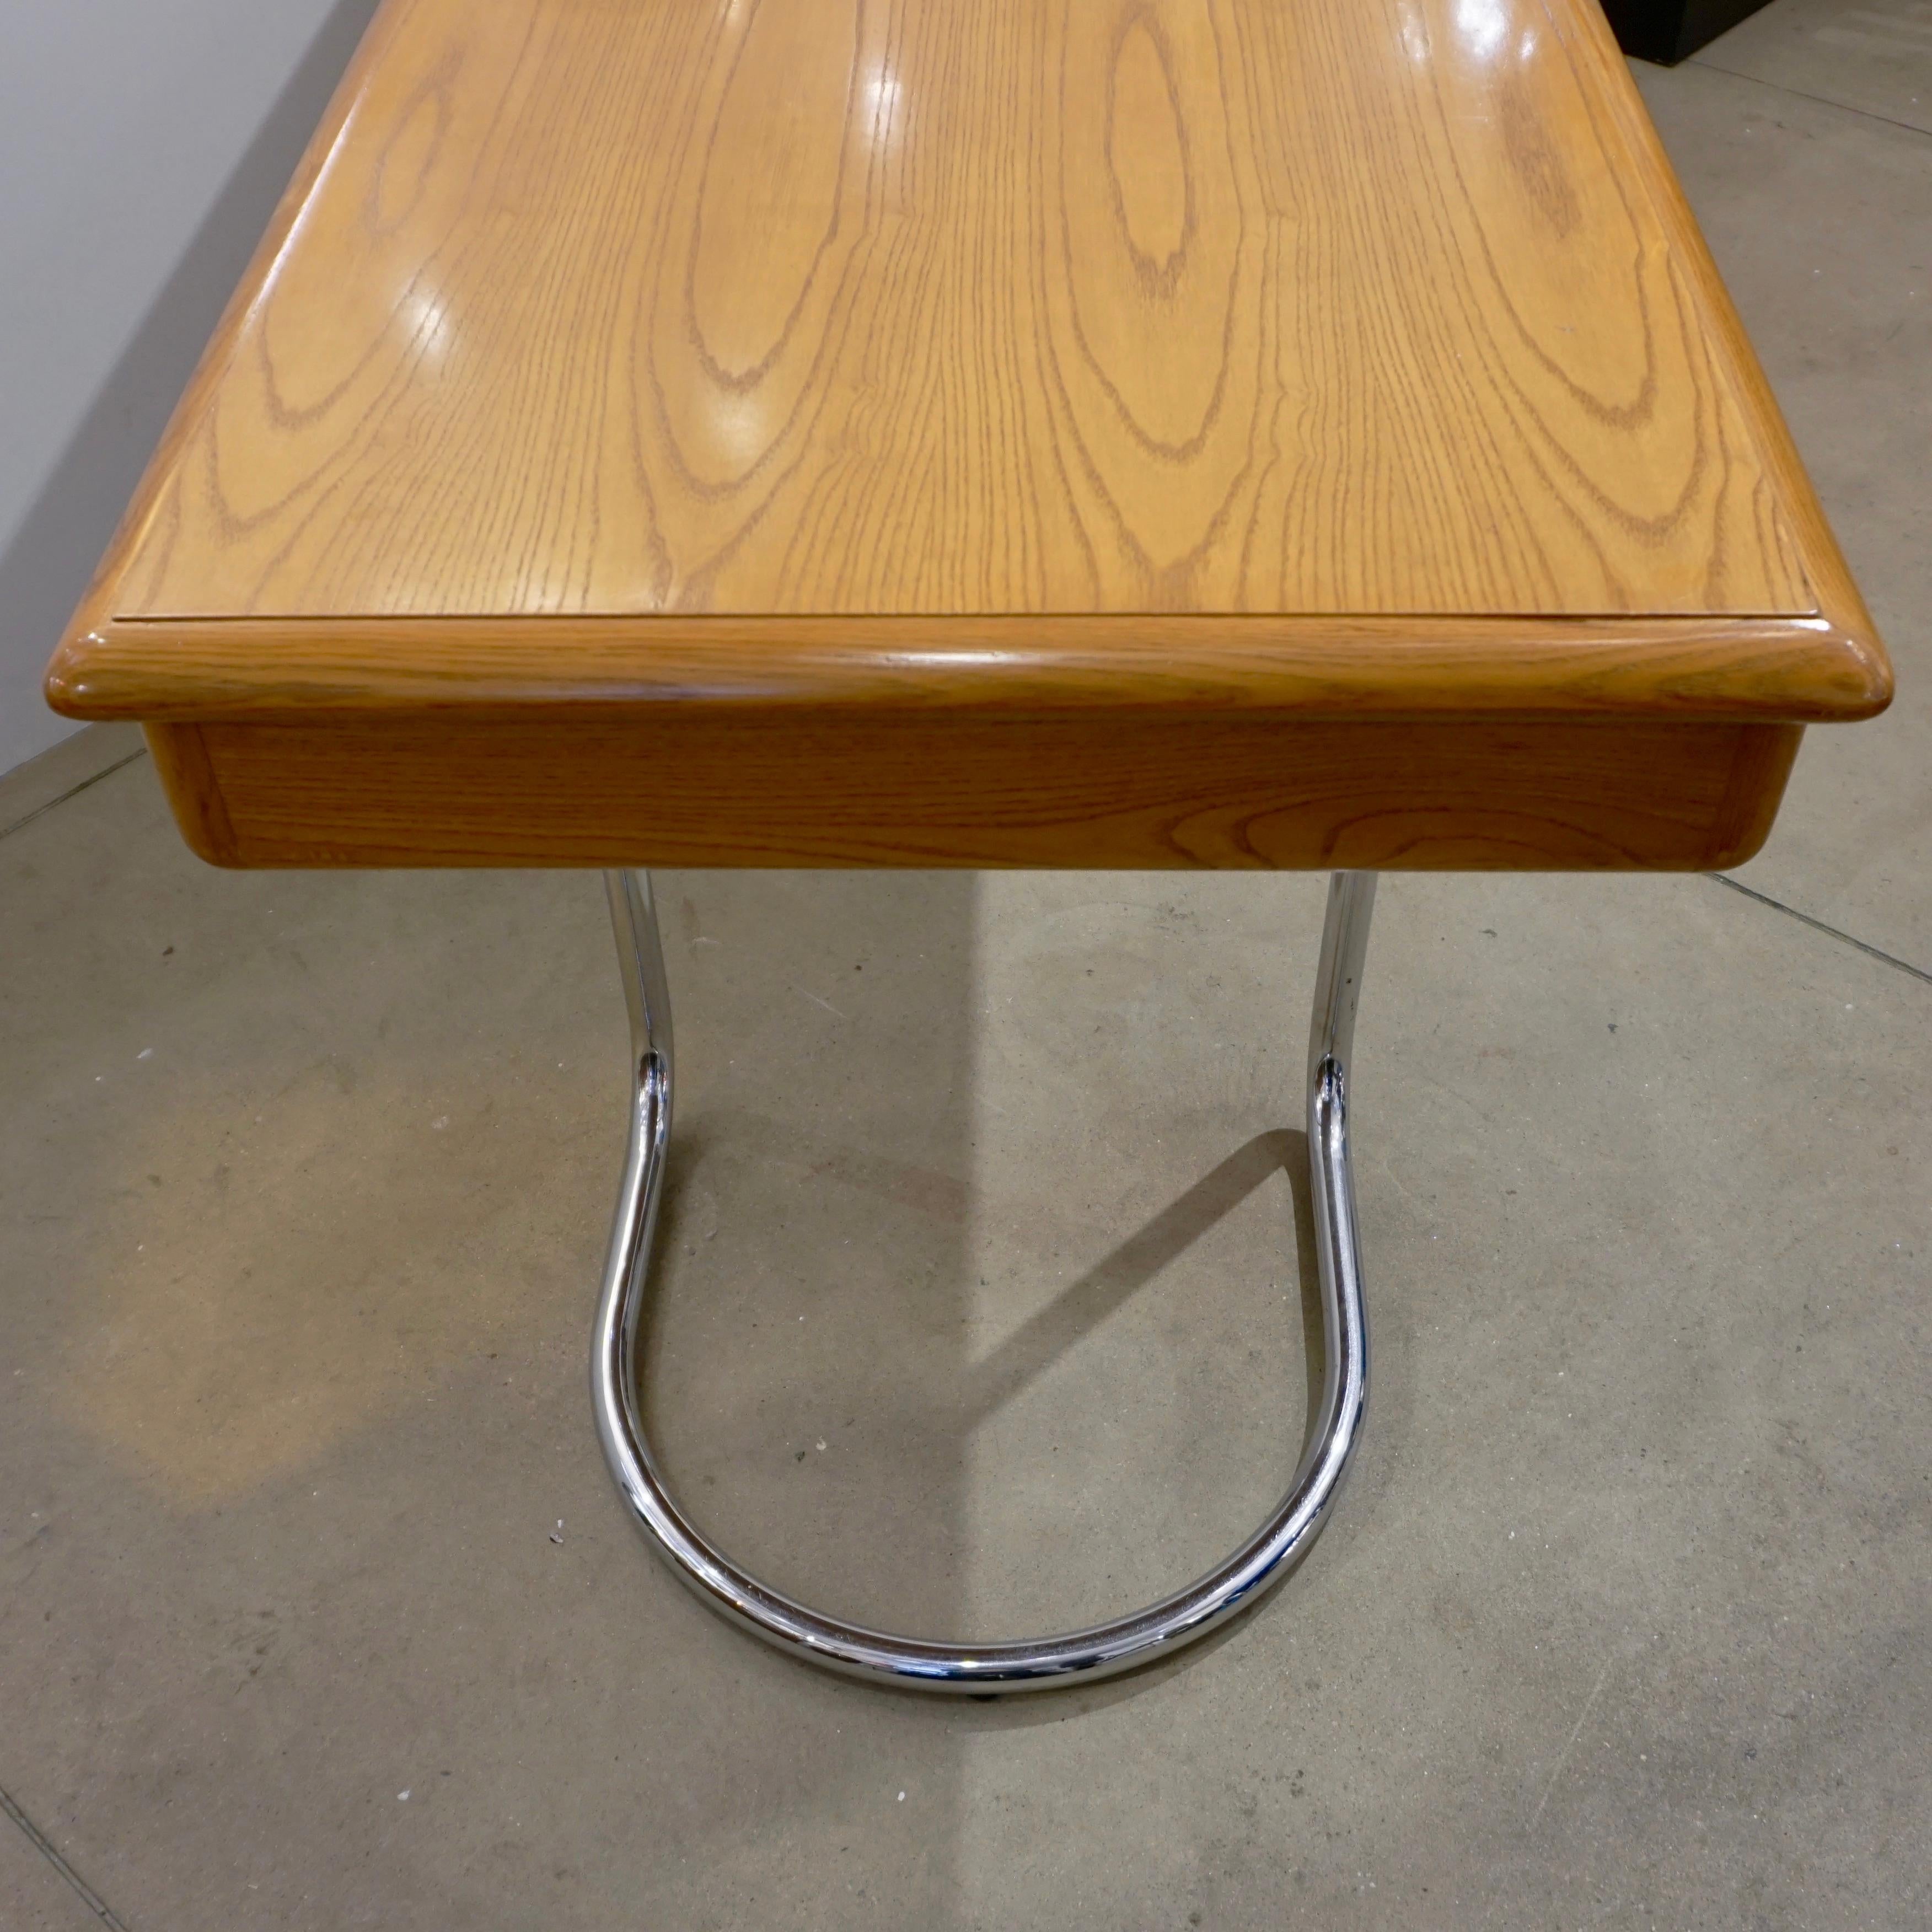 1970s Italian Vintage Curved Nickel Legs 3-Drawer Ash Tree Center Desk/Console For Sale 2